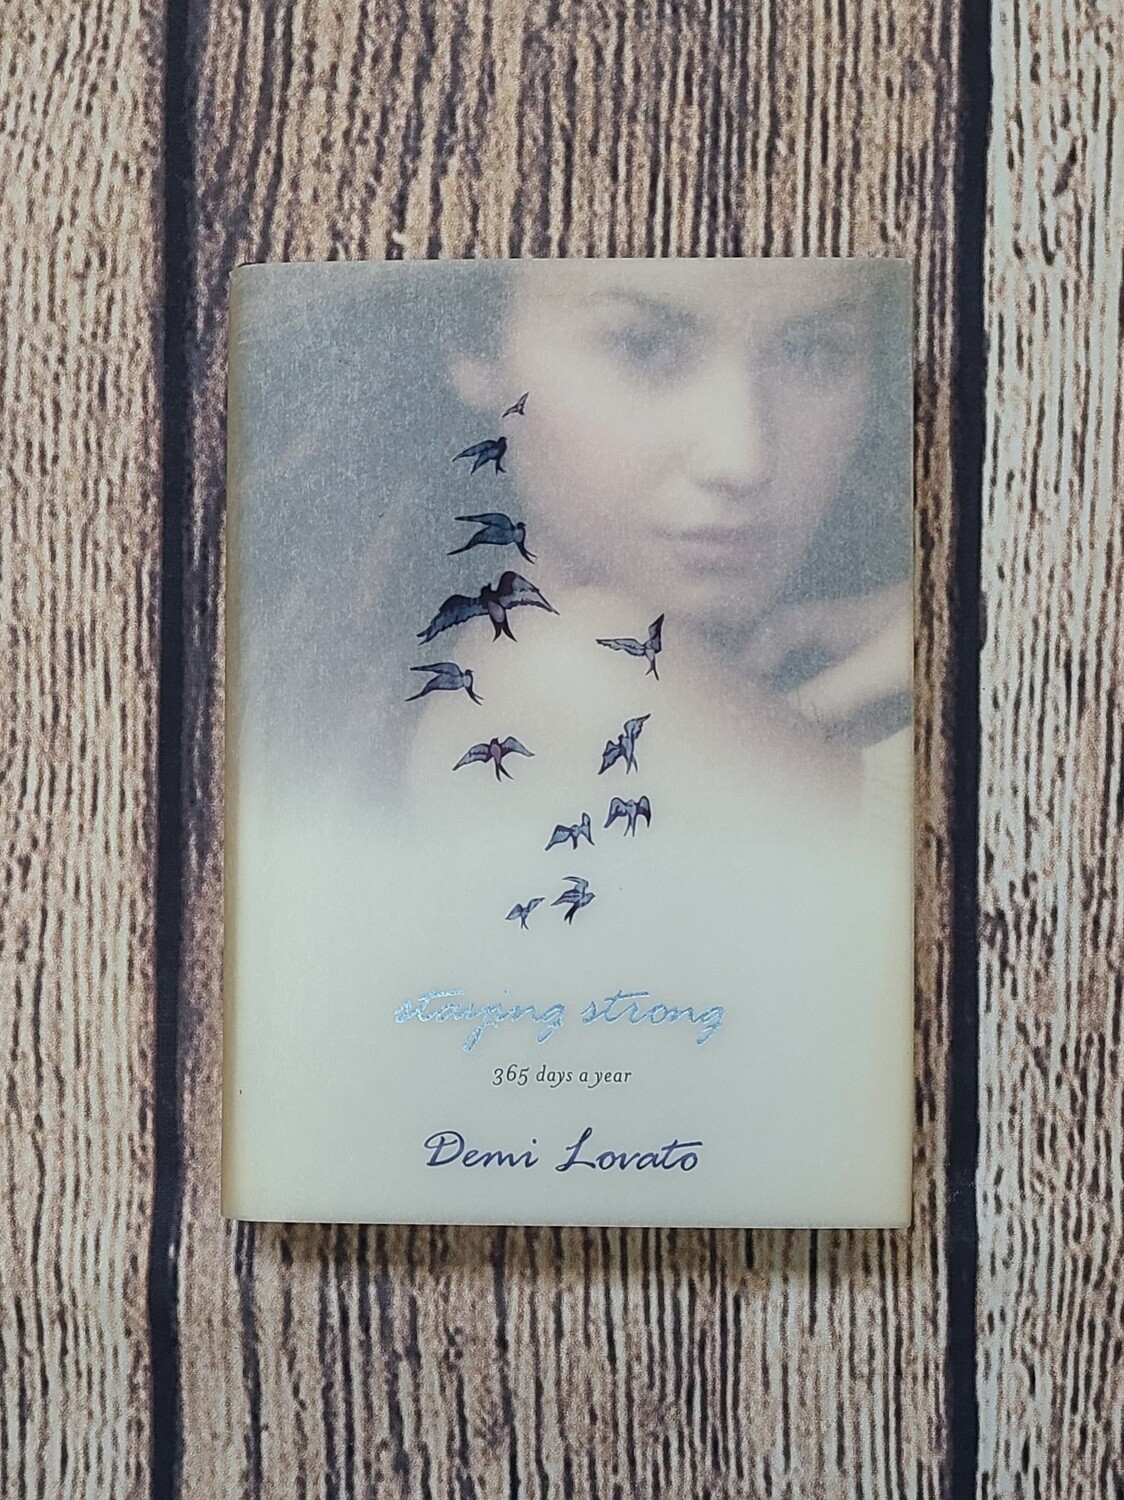 Staying Strong 365 Days A Year by Demi Lovato